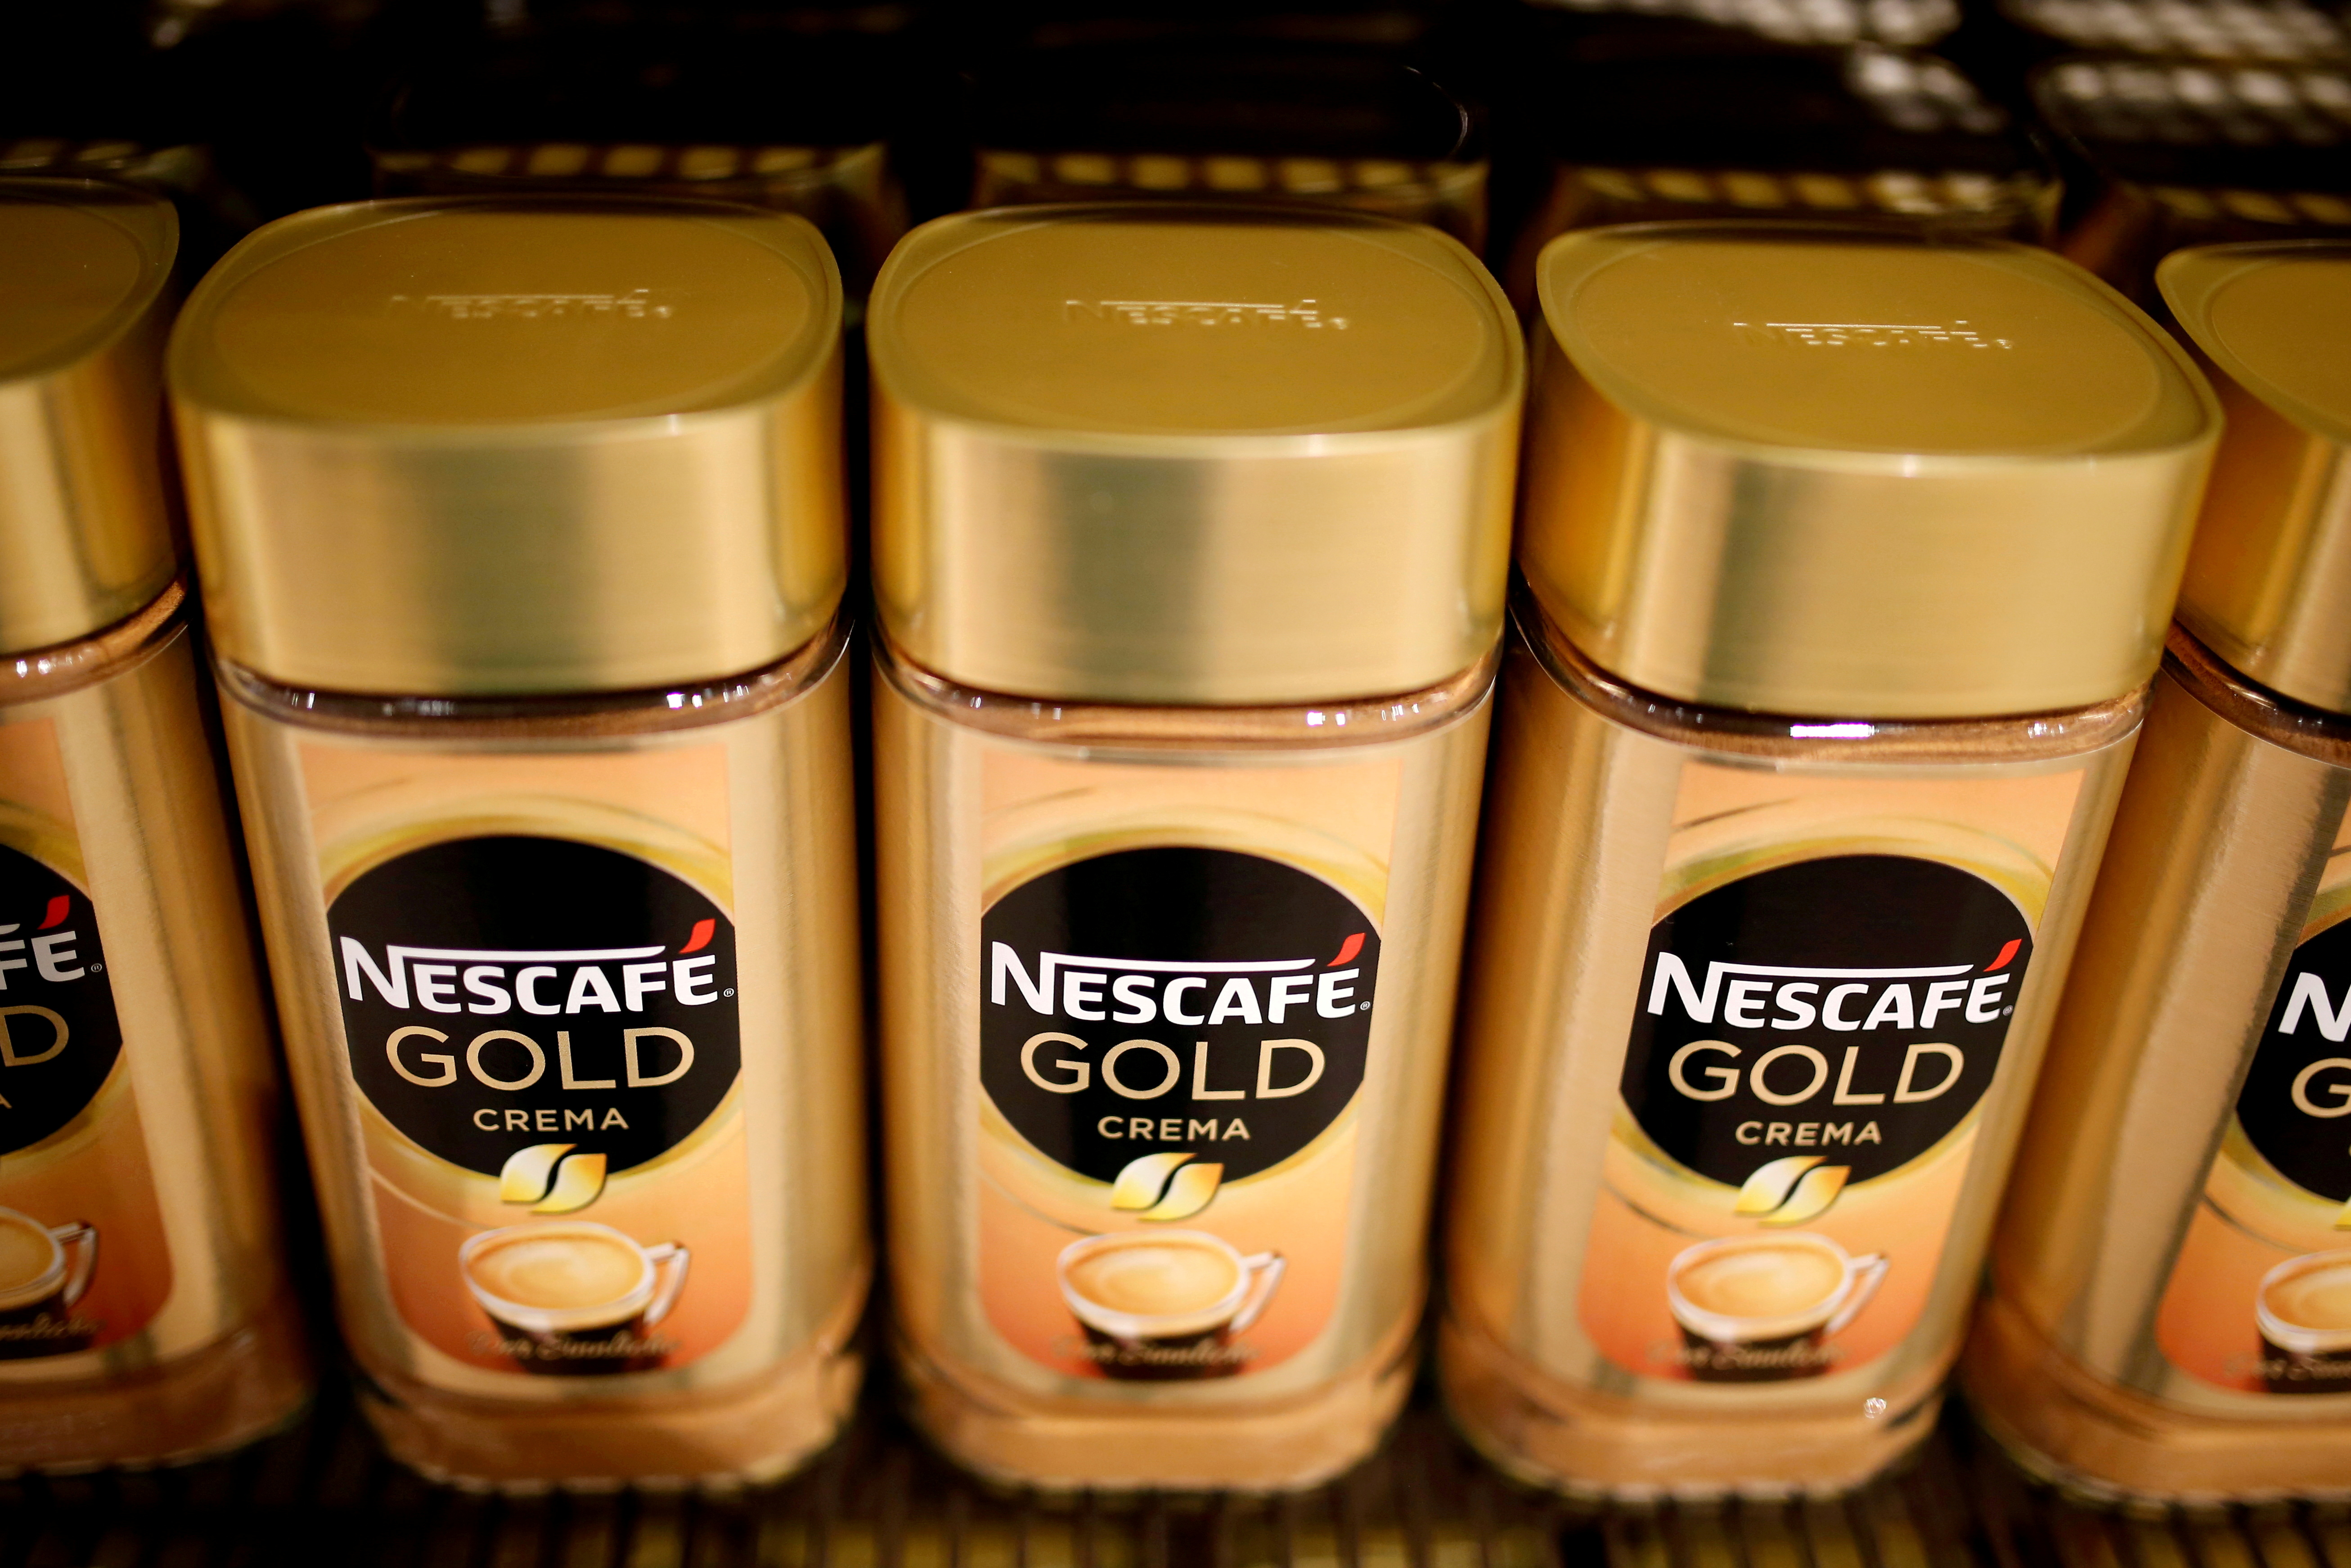 Jars of Nescafe Gold coffee by Nestle are pictured in the supermarket of Nestle headquarters in Vevey